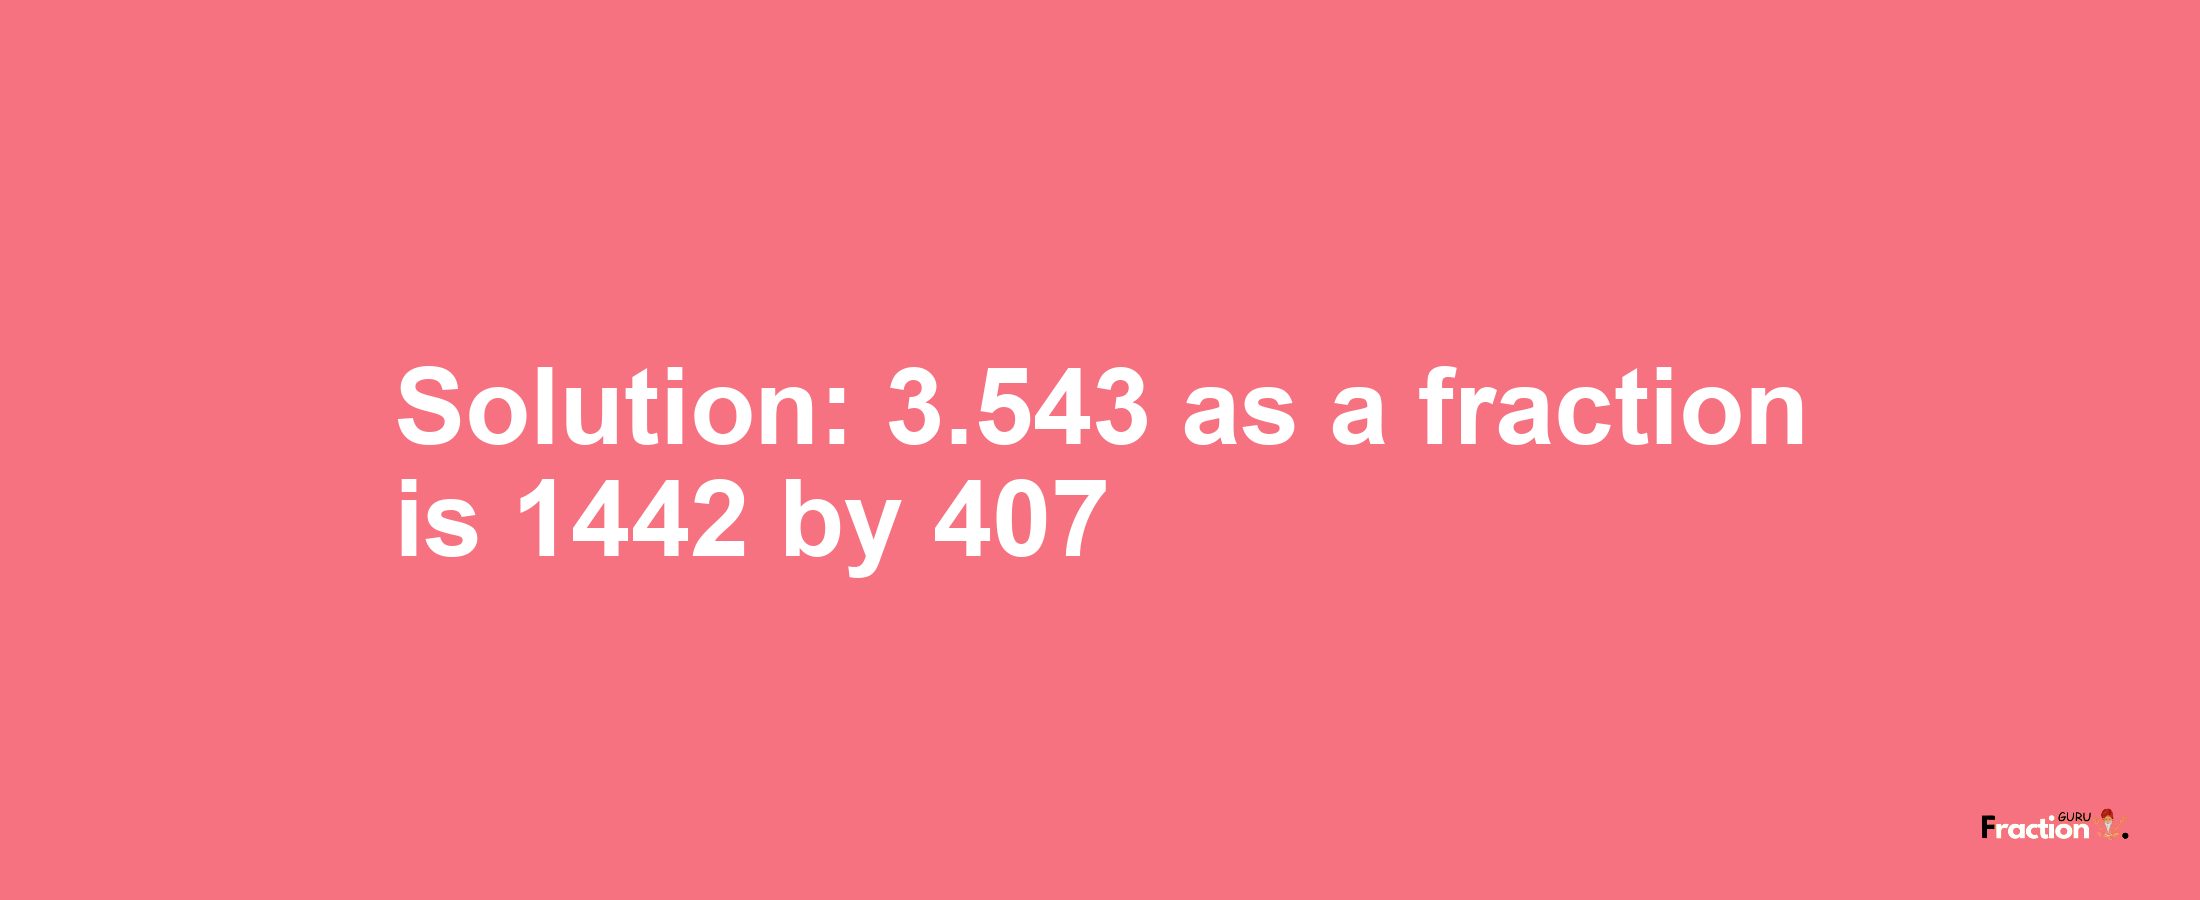 Solution:3.543 as a fraction is 1442/407